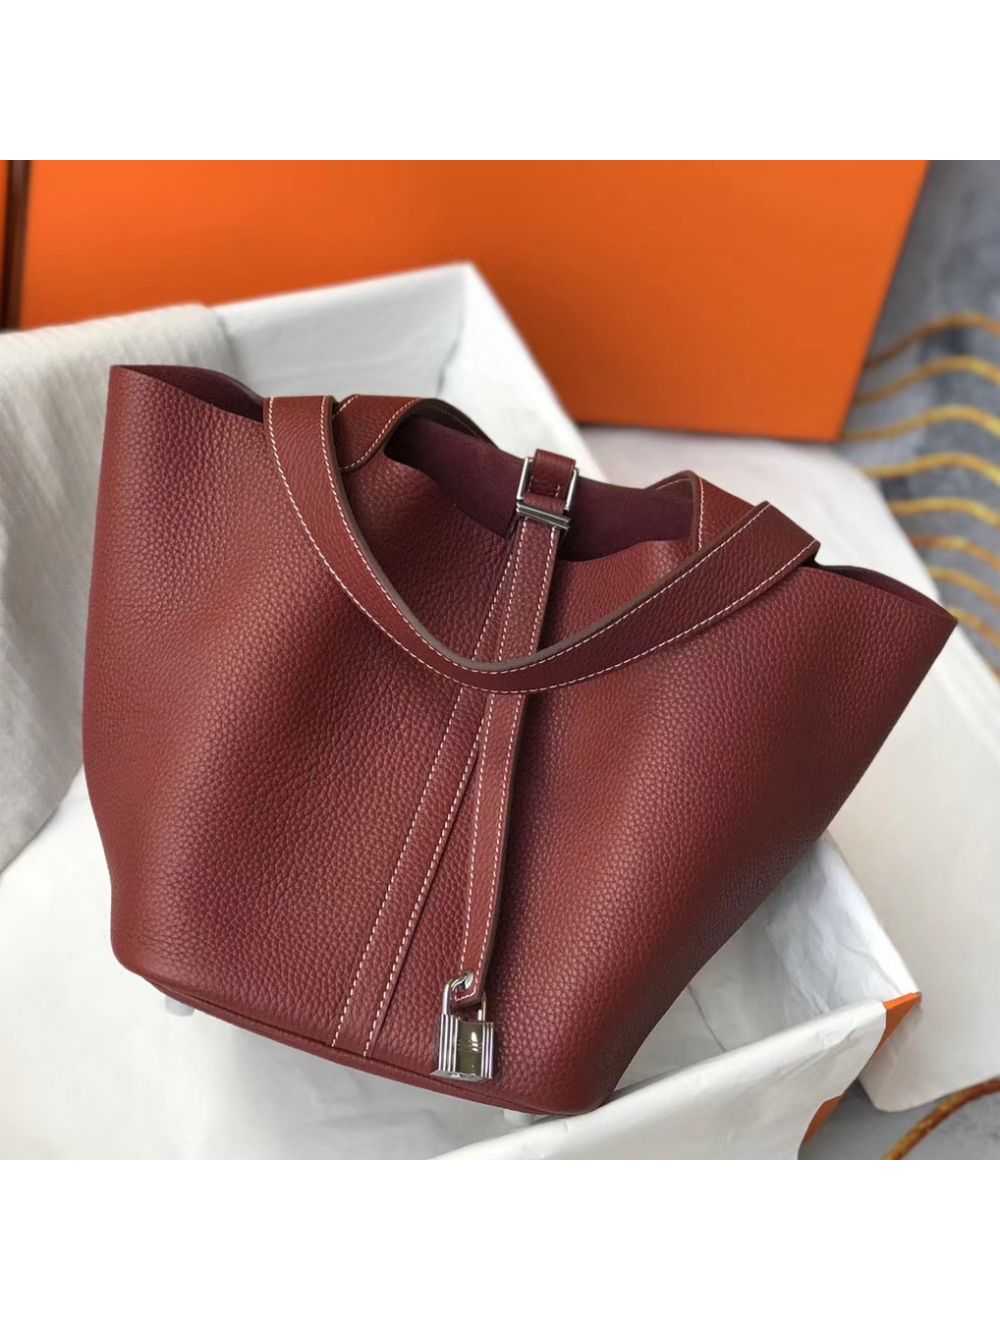 Replica Hermes Picotin Lock 18 Bag In Bordeaux Clemence Leather